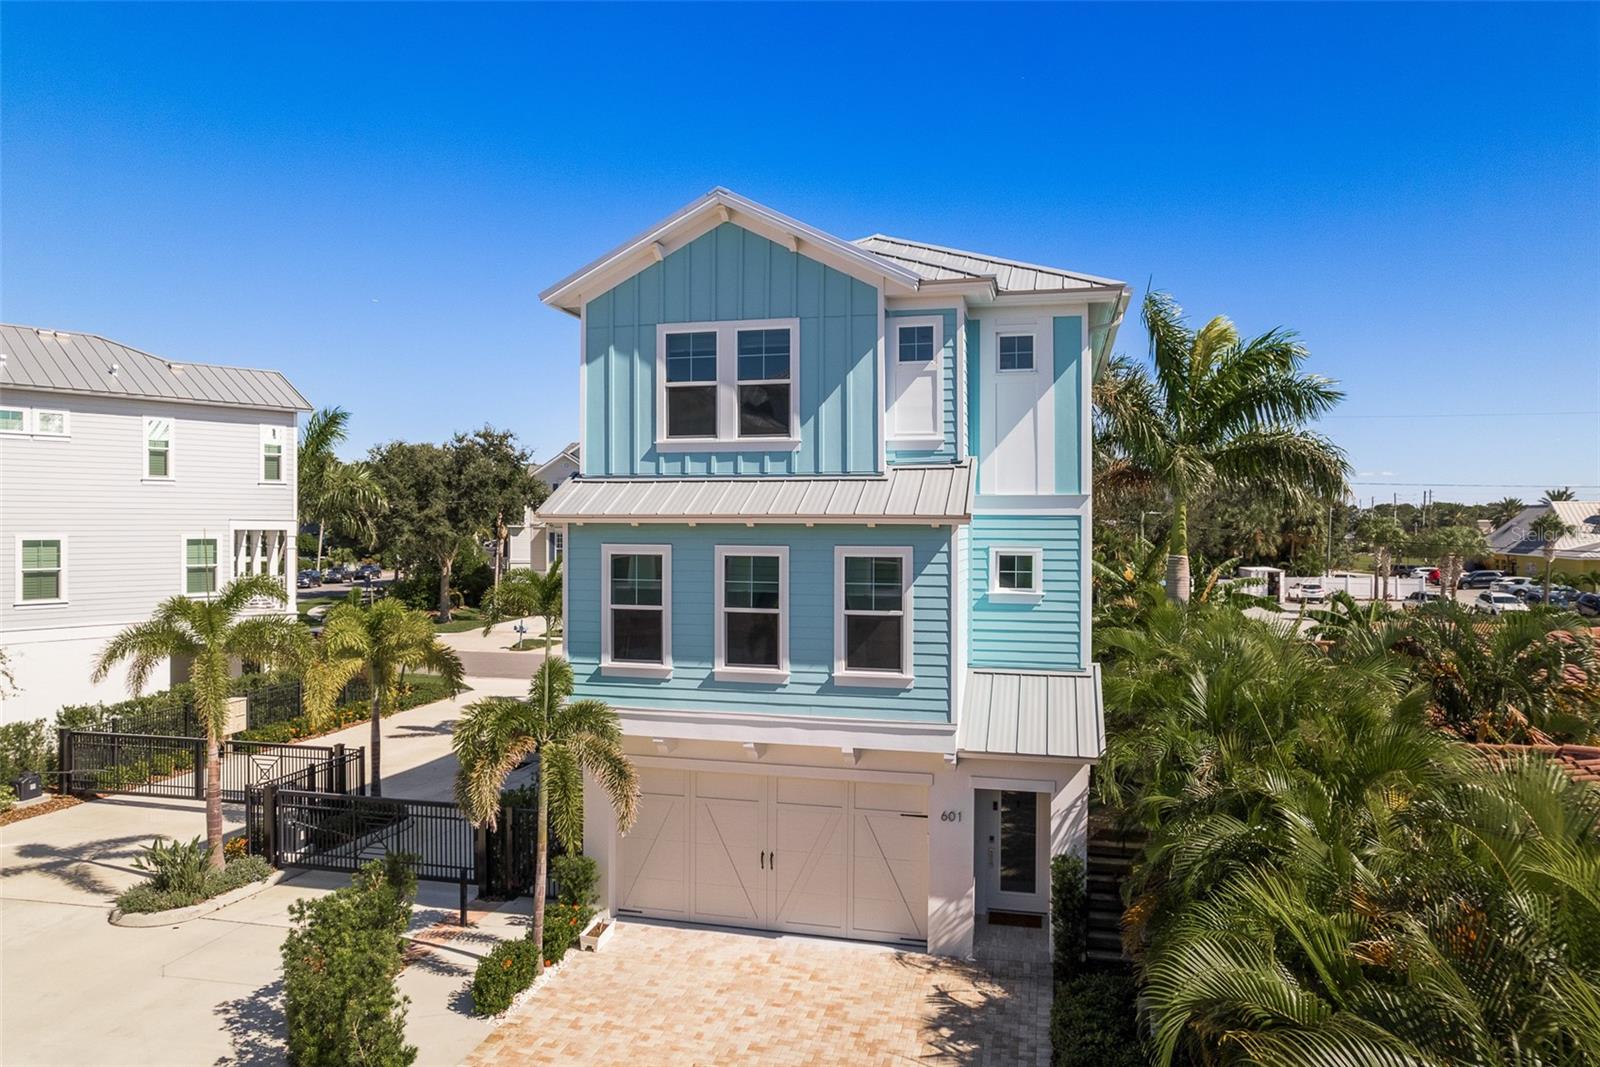 The front of the coastal townhome, dressed in Tiffany blue, exudes an aura of coastal charm and luxury, welcoming residents to a serene retreat by the sea.